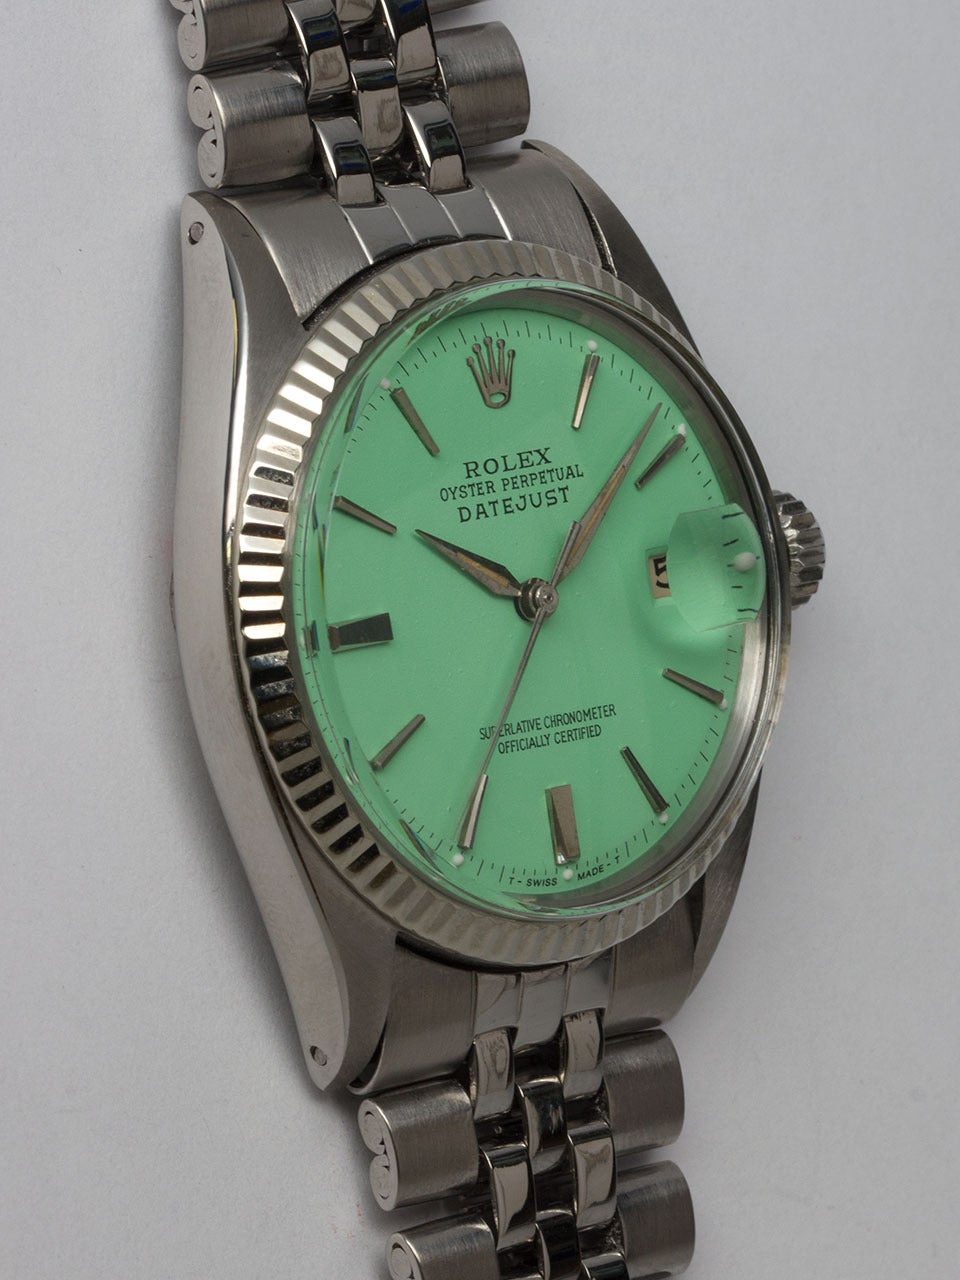 Rolex Stainless Steel Datejust Wristwatch ref 1601 serial #952,xxx circa 1963. 36mm diameter case with 14K white gold bezel and acrylic crystal.  With custom colored Mint Green dial with silver sticks indexes and sword hands.Powered by self winding